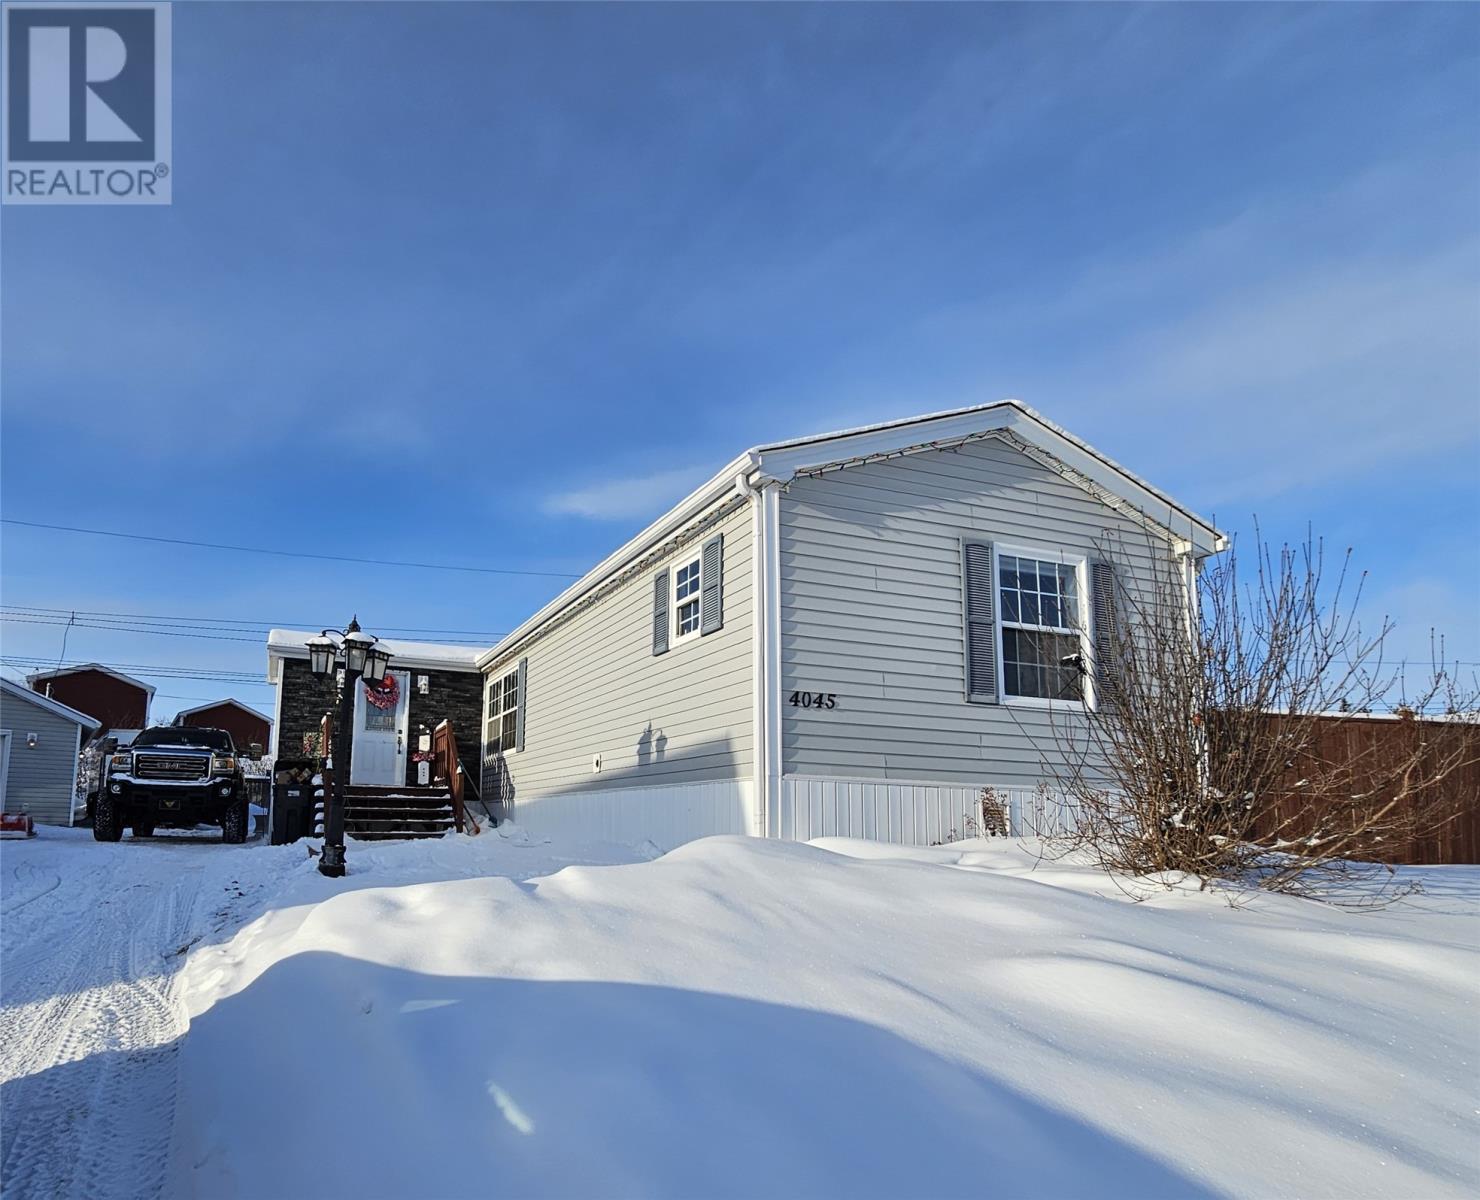 4045 Duley Crescent, Labrador City, A2V2R5, 3 Bedrooms Bedrooms, ,2 BathroomsBathrooms,Single Family,For sale,Duley,1266691